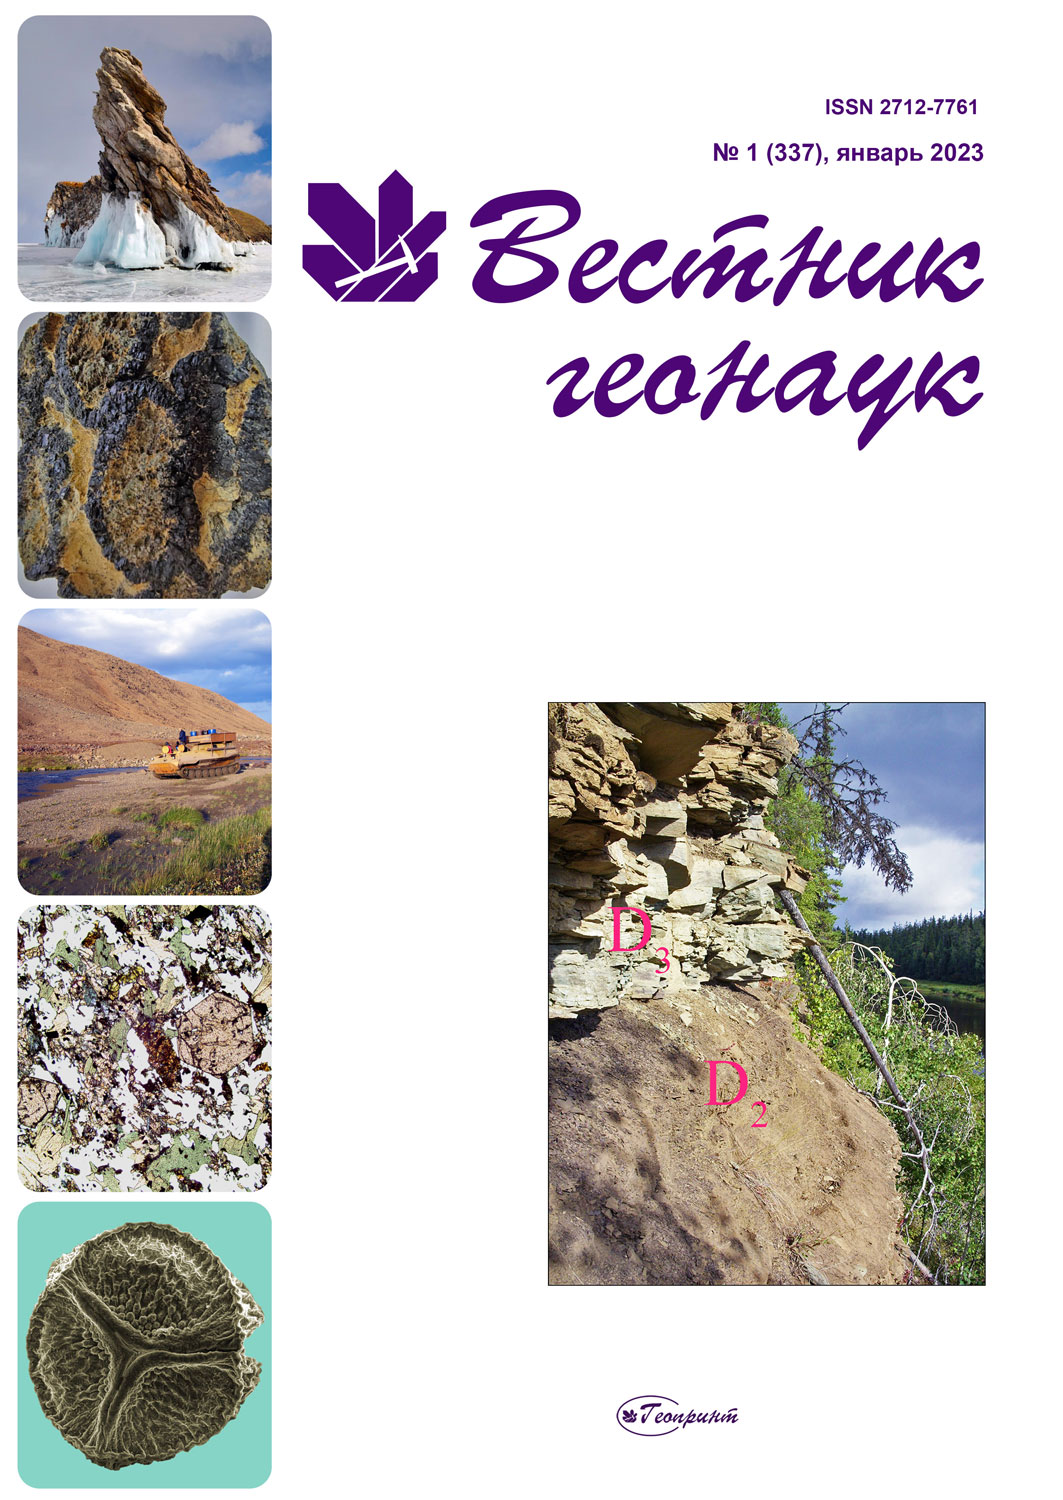                         Assemblages of vertebrates and zones from the Upper Givetian and Lower Frasnian of the East European Platform and Urals
            